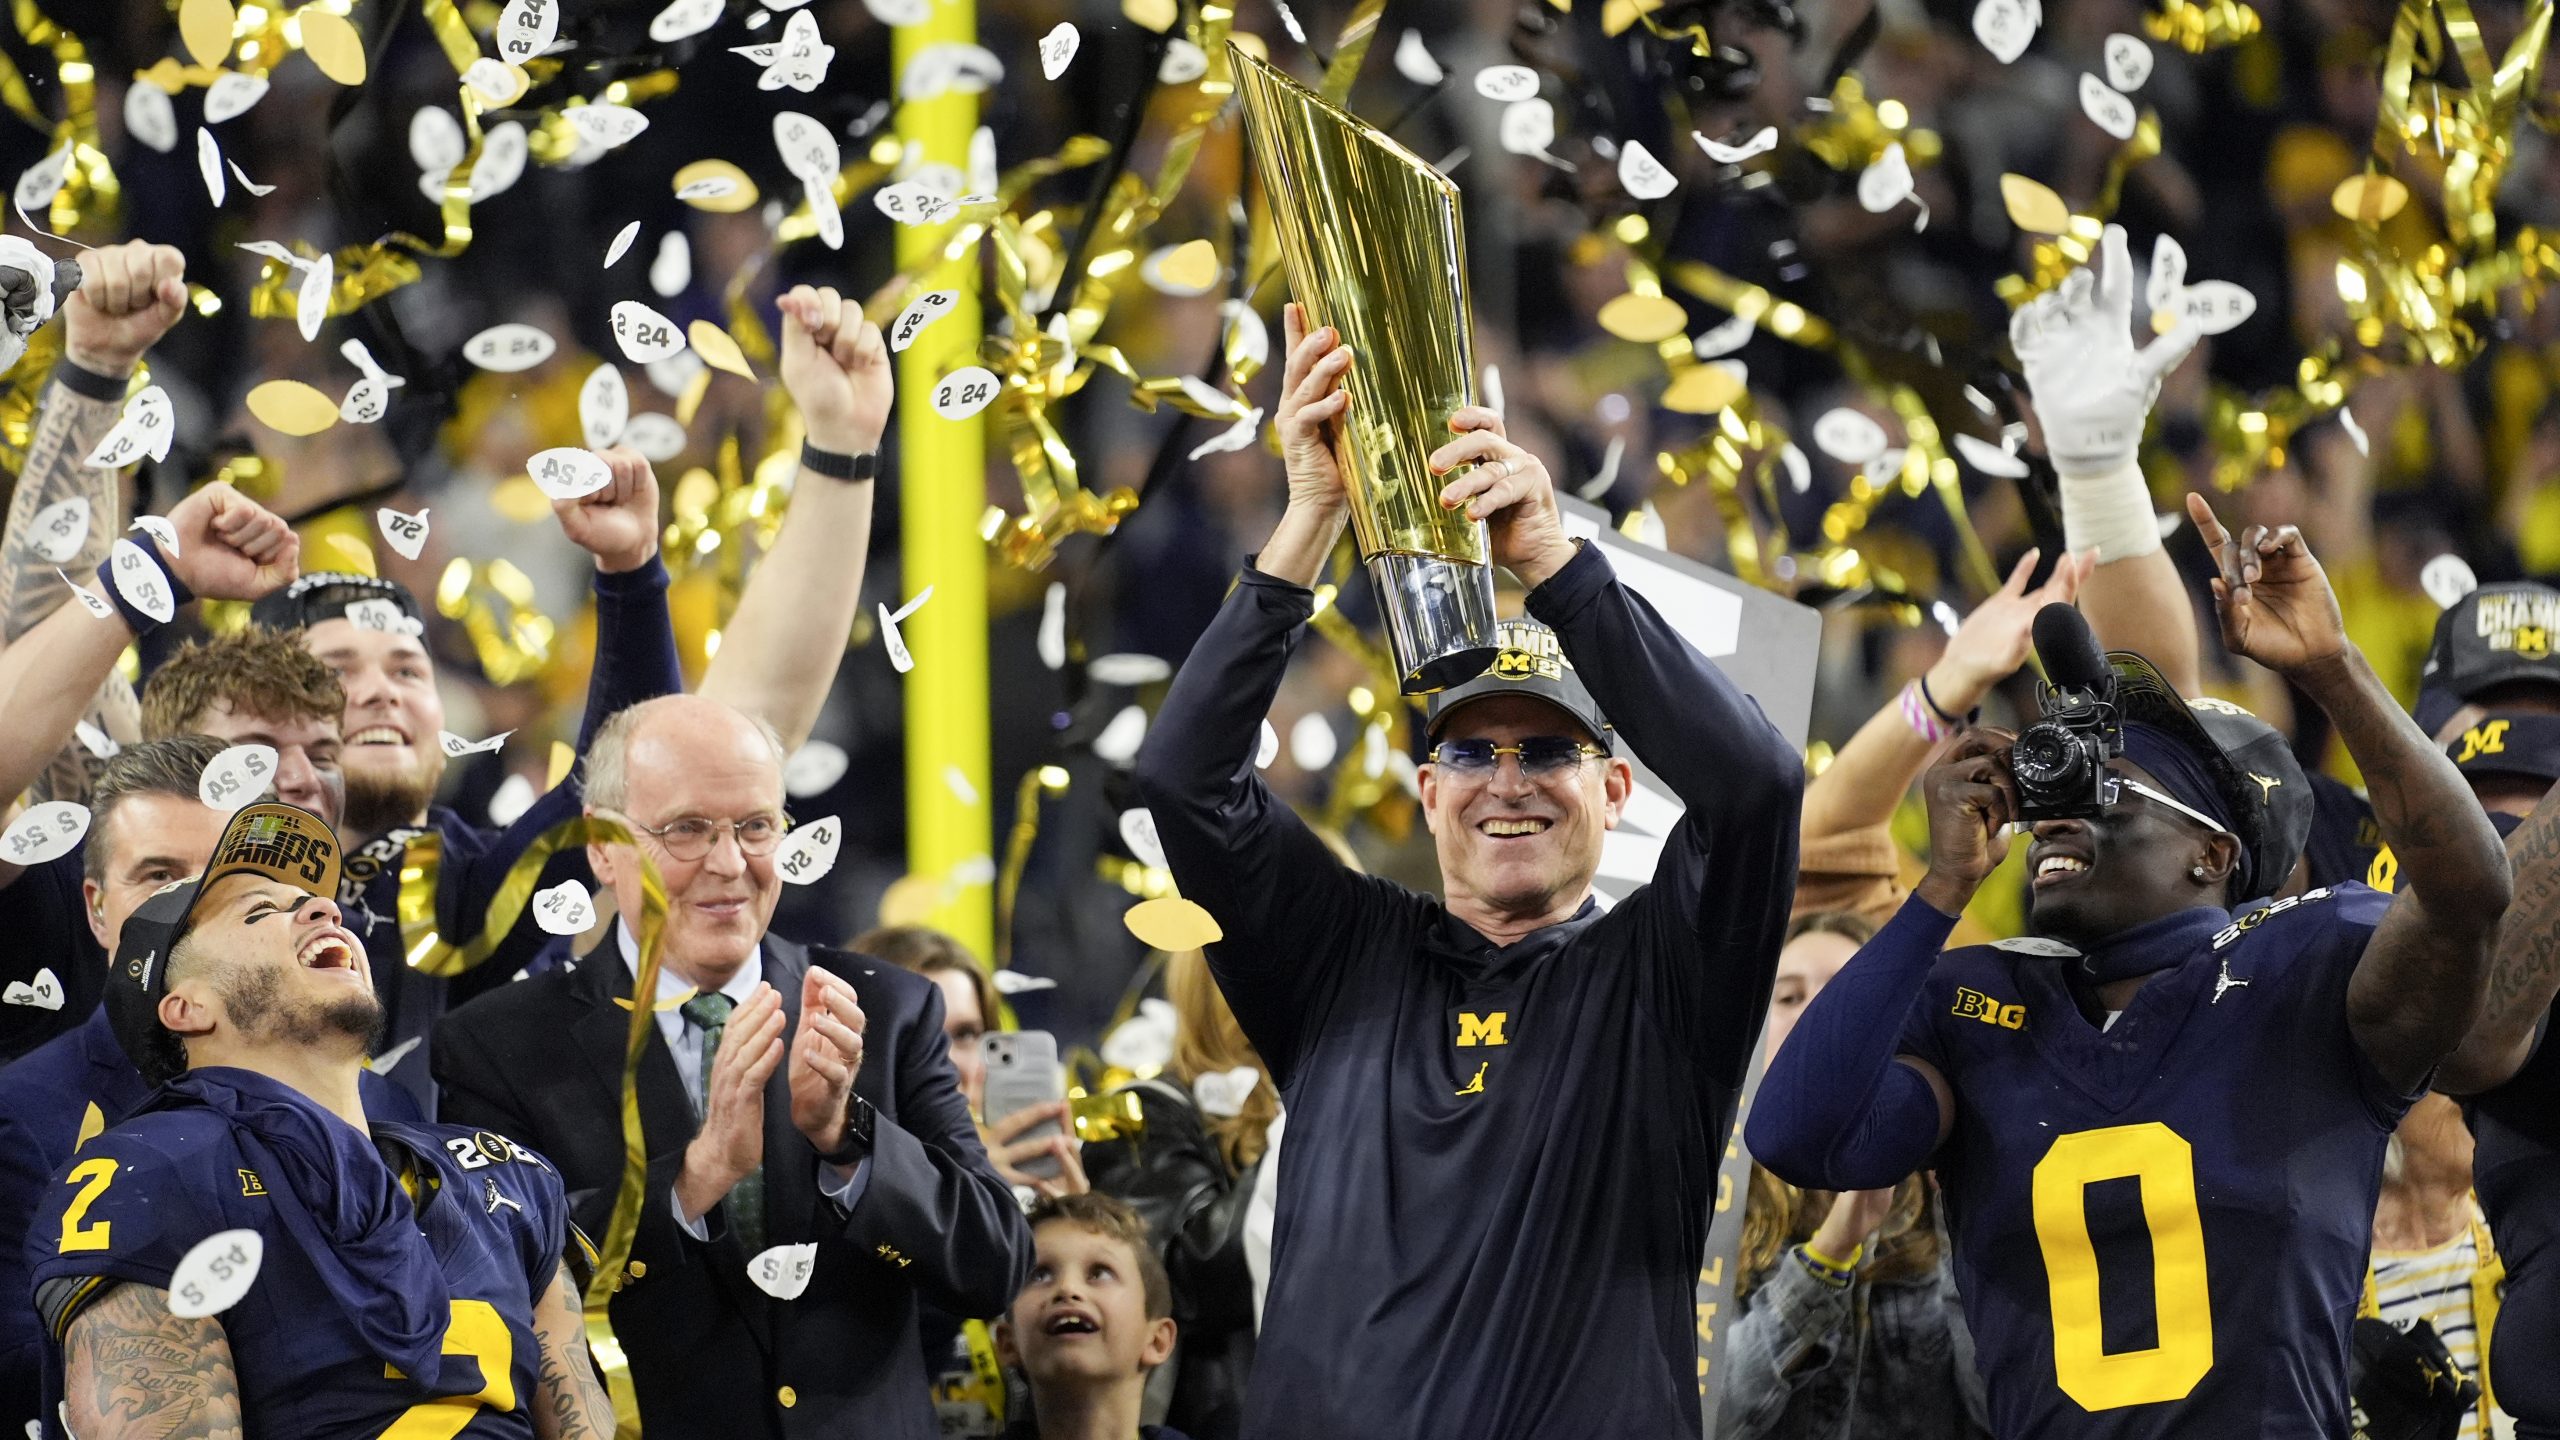 Harbaugh to coach Chargers after leading Michigan to national title